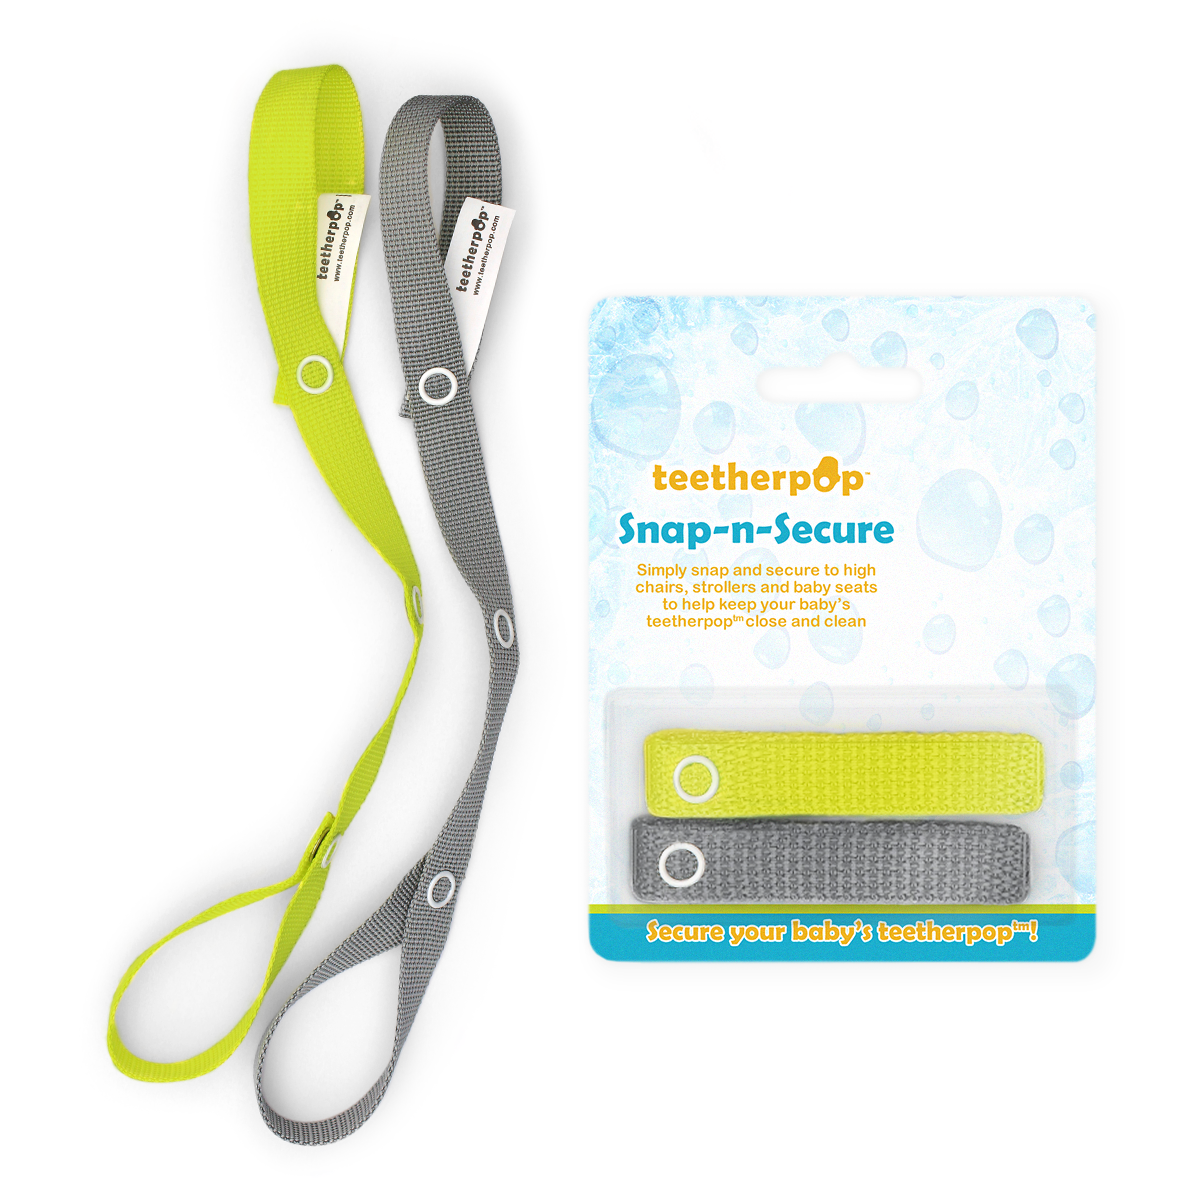 Teetherpop™ Snap and Secure - Keep Your Baby's Items Close and Clean –  teetherpop